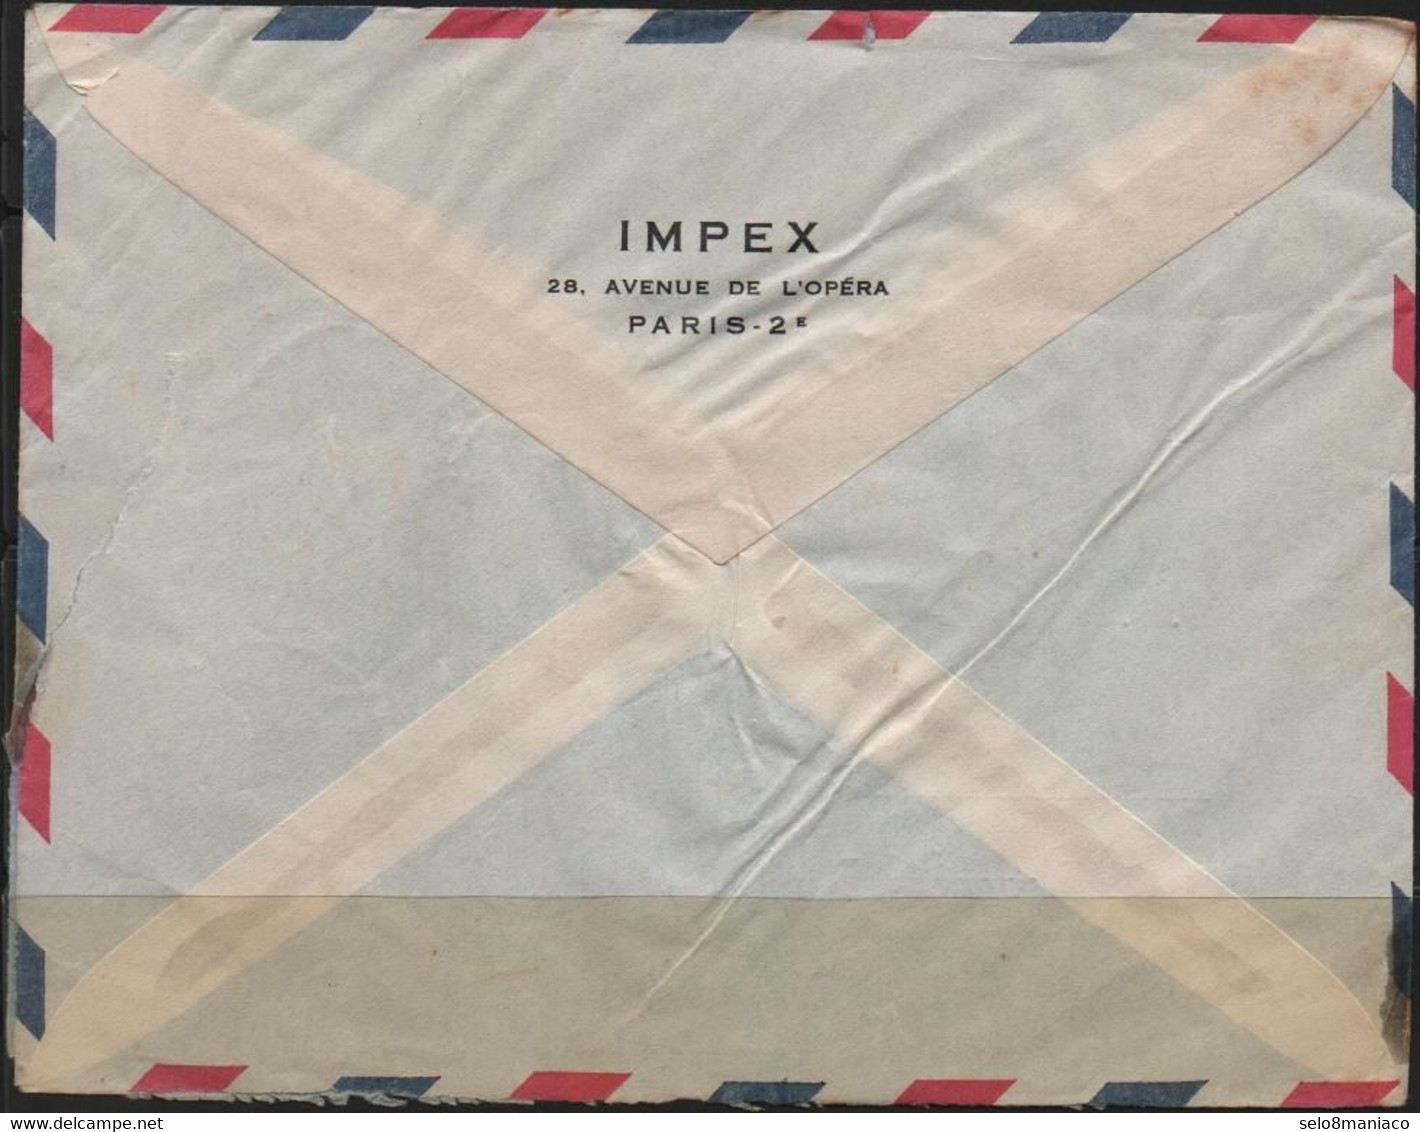 X1850-France-Multifranked Basketball Airmail Cover From Paris To Rio, Brazil-1955 - Basketball